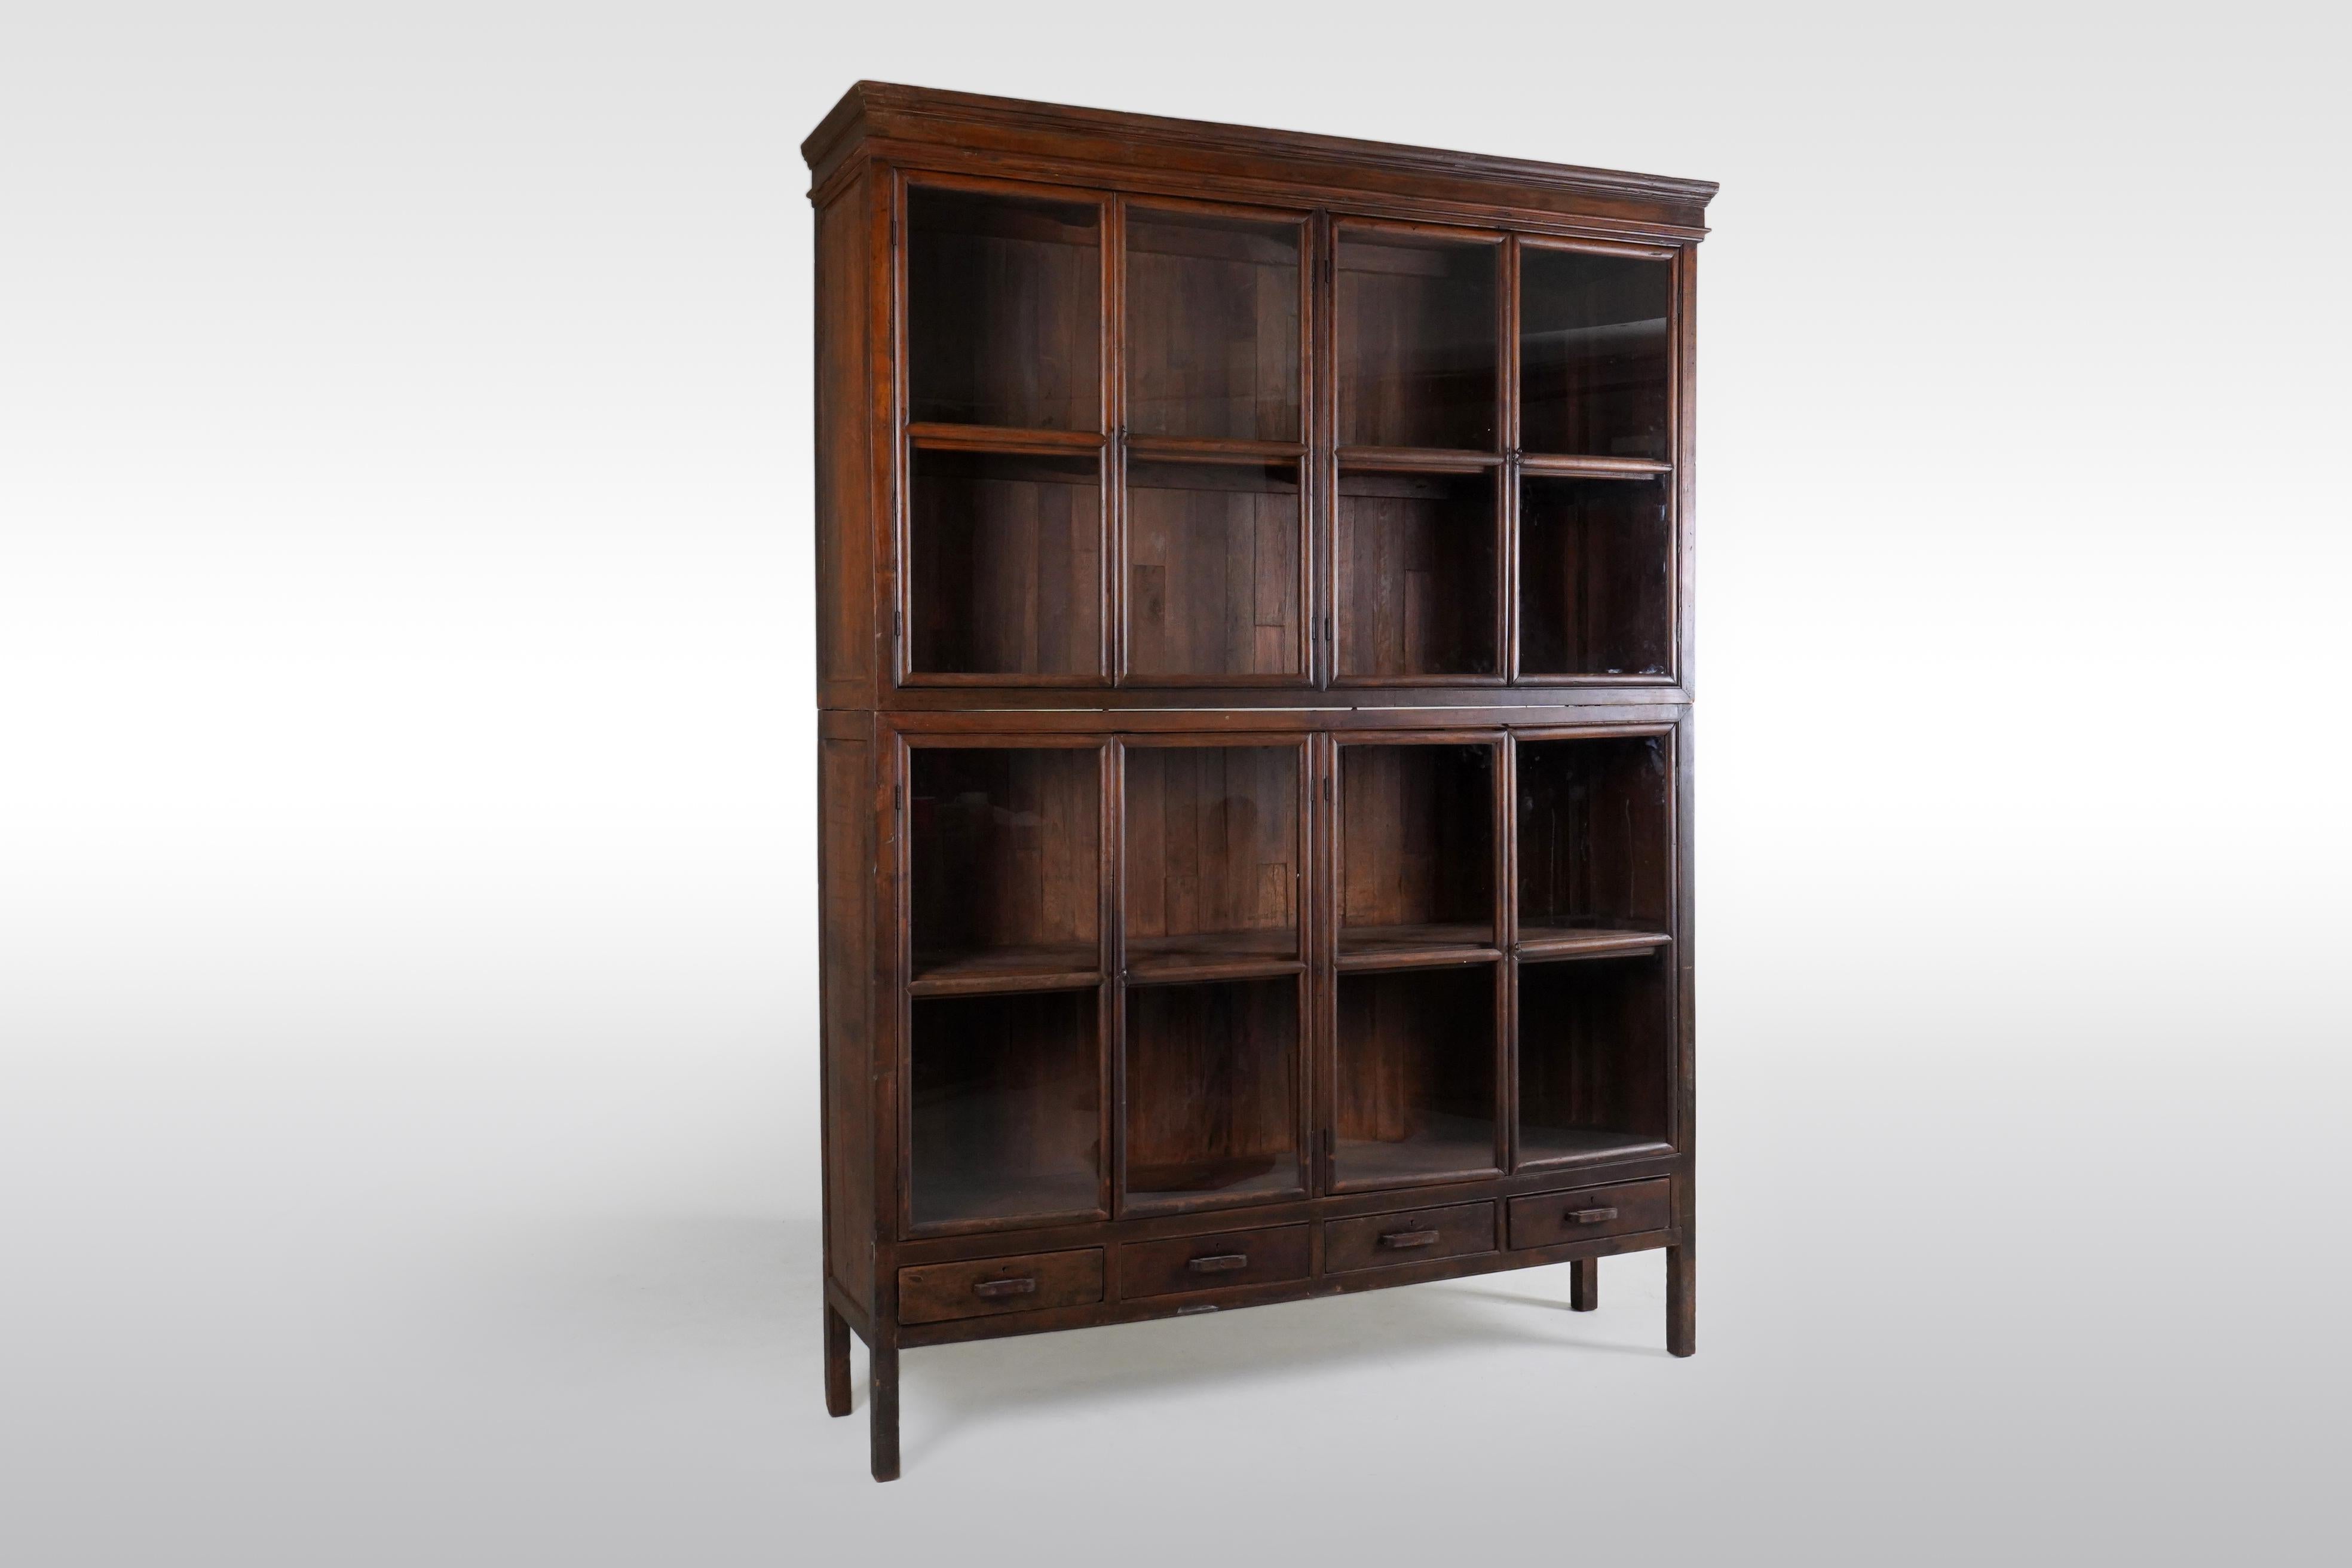 20th Century A Tall British Colonial Bookcase